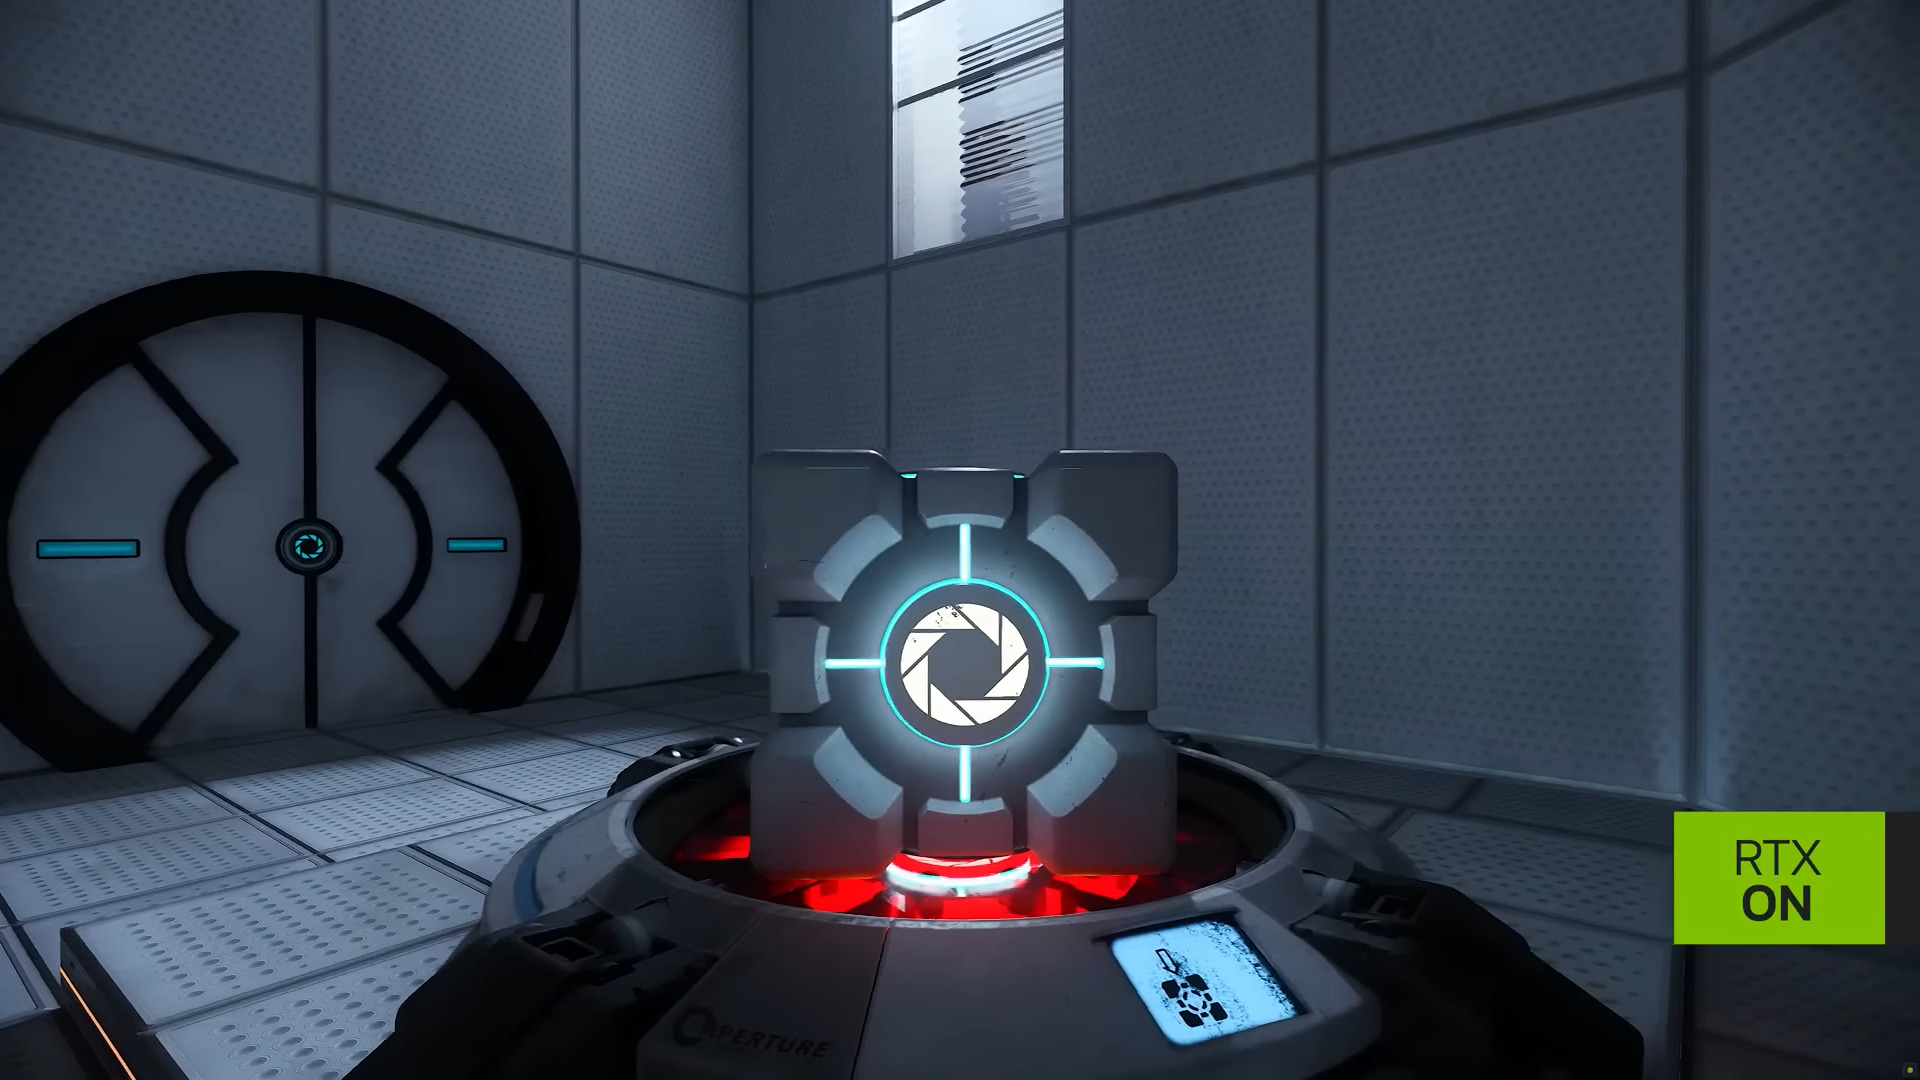  Portal with RTX has been updated to include Nvidia's latest load time accelerating GPU tech 